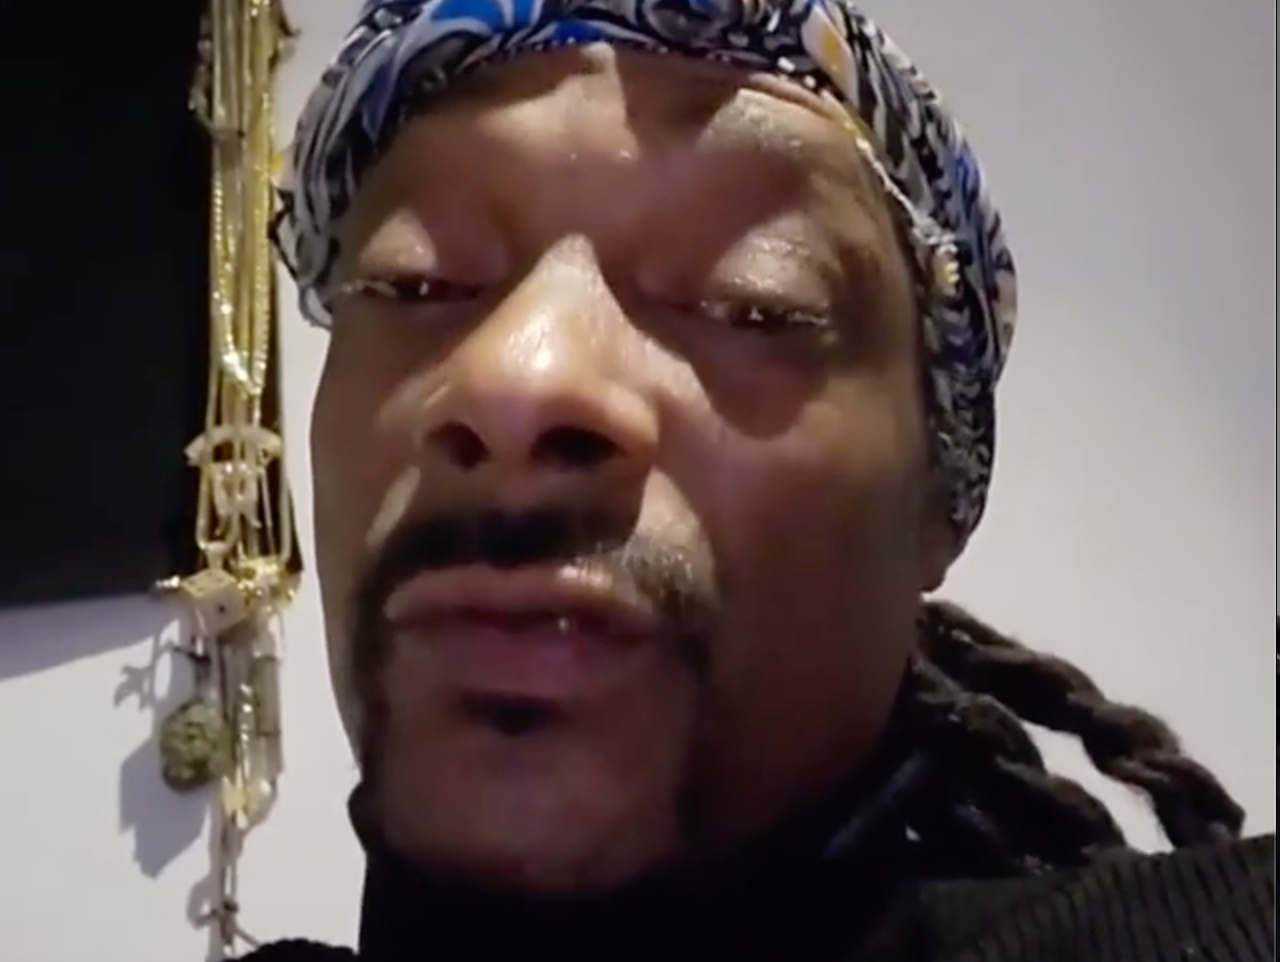 Snoop Dogg Says He Didn’t Threaten Gayle King: ‘I’m a Non-Violent Person’